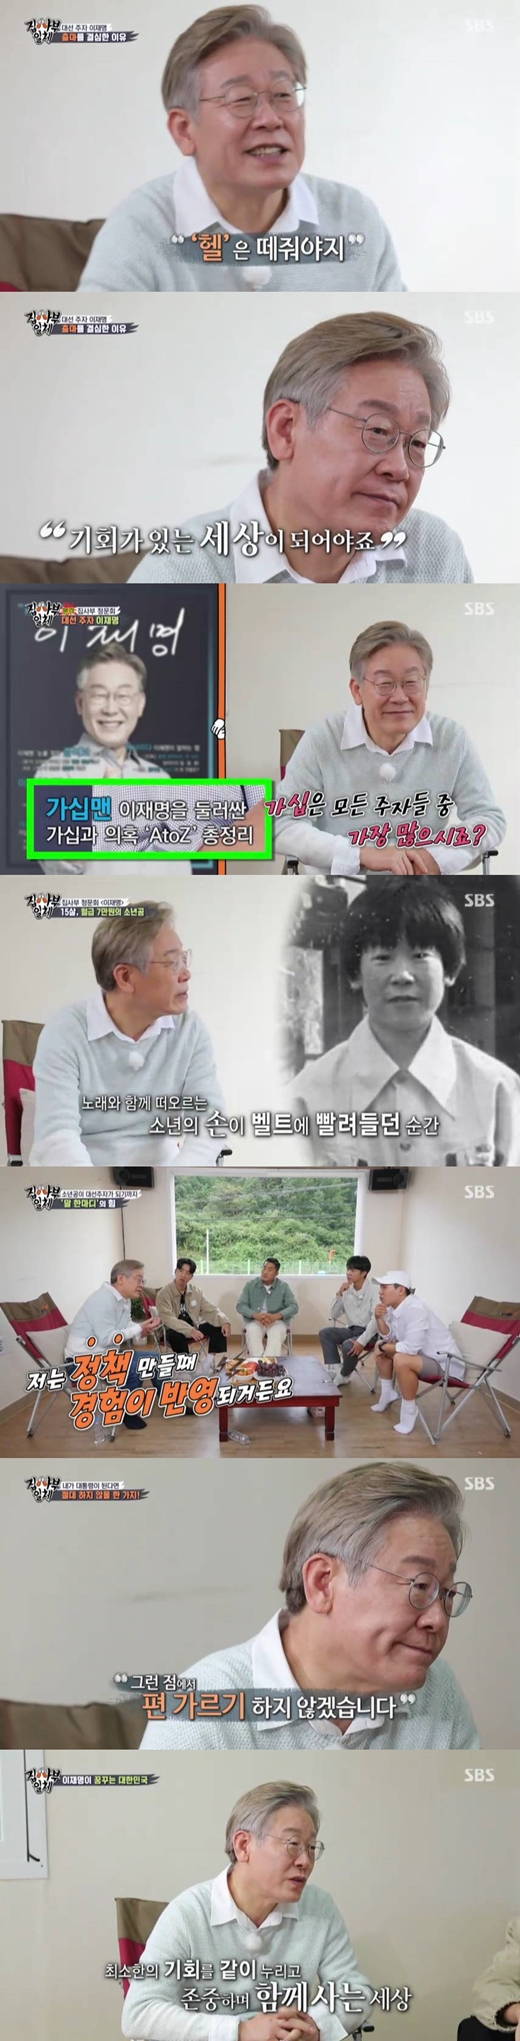 Lee Jae-myung, the governor of Gyeonggi Province, appeared on SBS All The Butlers.According to Nielsen Korea, a TV viewer rating company, All The Butlers, which was broadcast on the 26th, attracted 10.1% of the metropolitan area furniture TV viewer ratings, and 2049 target TV viewer ratings, which are topical and competitive indicators, took the overwhelming first place with 4.1%.Top TV viewer ratings per minute soared to 13.5 per cent.Lee Jae-myung, the governor of Gyeonggi Province, appeared as master on the day of the special feature of For runner after last week.The place where the members met Lee Jae-myung was Andong Station.Lee Jae-myung, who spent his childhood at Andong Station, said, I wanted to show you what it is. It is not really rough, it is very timid and emotional.He knew me as a very rough person, and it was an opportunity to show that I was not such a person. He has attracted attention by revealing the various issues surrounding him through the All The Butlers hearing as well as the story of his life in the difficult environment since he was a boy.Lee Jae-myung said that he was suffering from a disability while living in a factory as a child when he decided to run for For. I was used to it at the time, and I thought it was natural.I wanted to change the world, he said. There are young people who call this country we live in hell.If I believe I can make something by making reasonable efforts, I wont. Im not going to do it.Since then, the All The Butlers hearing has begun.Members asked about former prosecutor general Yoon Seok-ryul and former Democratic Party leader Lee Nak-yeon as a common question for For.Lee Jae-myung cited the economy as the strength he wanted to bring from Lee Nak-yeon, and the evaluation that it would be fair from Yoon Seok-ryul.He added, There is no reason to win because it is an internal competition with Lee Nak-yeon, he said, describing Yoon Seok-ryul as a competitor to win and Lee Nak-yeon as a competitor to win.Lee Jae-myung, who asked, If you become a president, you will never do it. I will not side with you, he said. When you compete, you represent the Democratic Party but you represent everyone when you become president.I will not take sides in that regard, he said.Finally, Lee Jae-myung asked the question of Korea I dream of, A common sense world where you do not lose the rule if you break the rules.Everyone is in harmony, enjoying the least opportunity, respecting and living together. Meanwhile, Lee Nak-yeon, former Democratic Party leader, will appear on All The Butlers on October 3, following former prosecutor general Yoon Seok-ryul and Lee Jae-myung governor of Gyeonggi Province.